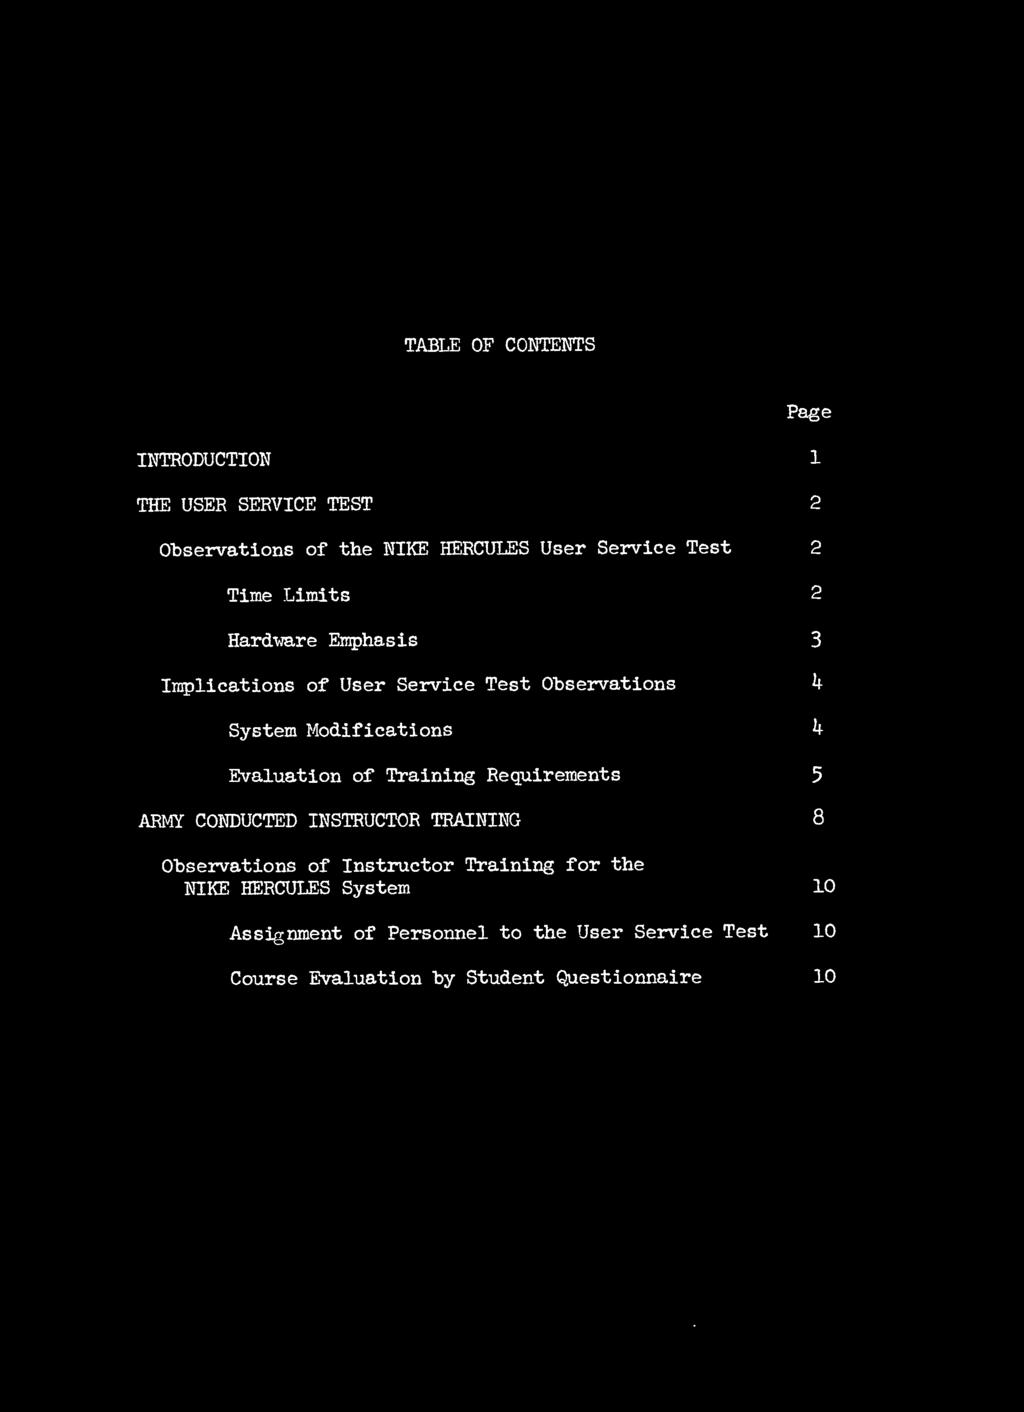 TABLE OF CONTENTS INTRODUCTION 1 THE USER SERVICE TEST 2 Page Observations of the NIKE HERCULES User Service Test 2 Time Limits 2 Hardvare Emphasis 3 Implications of User Service Test Observations